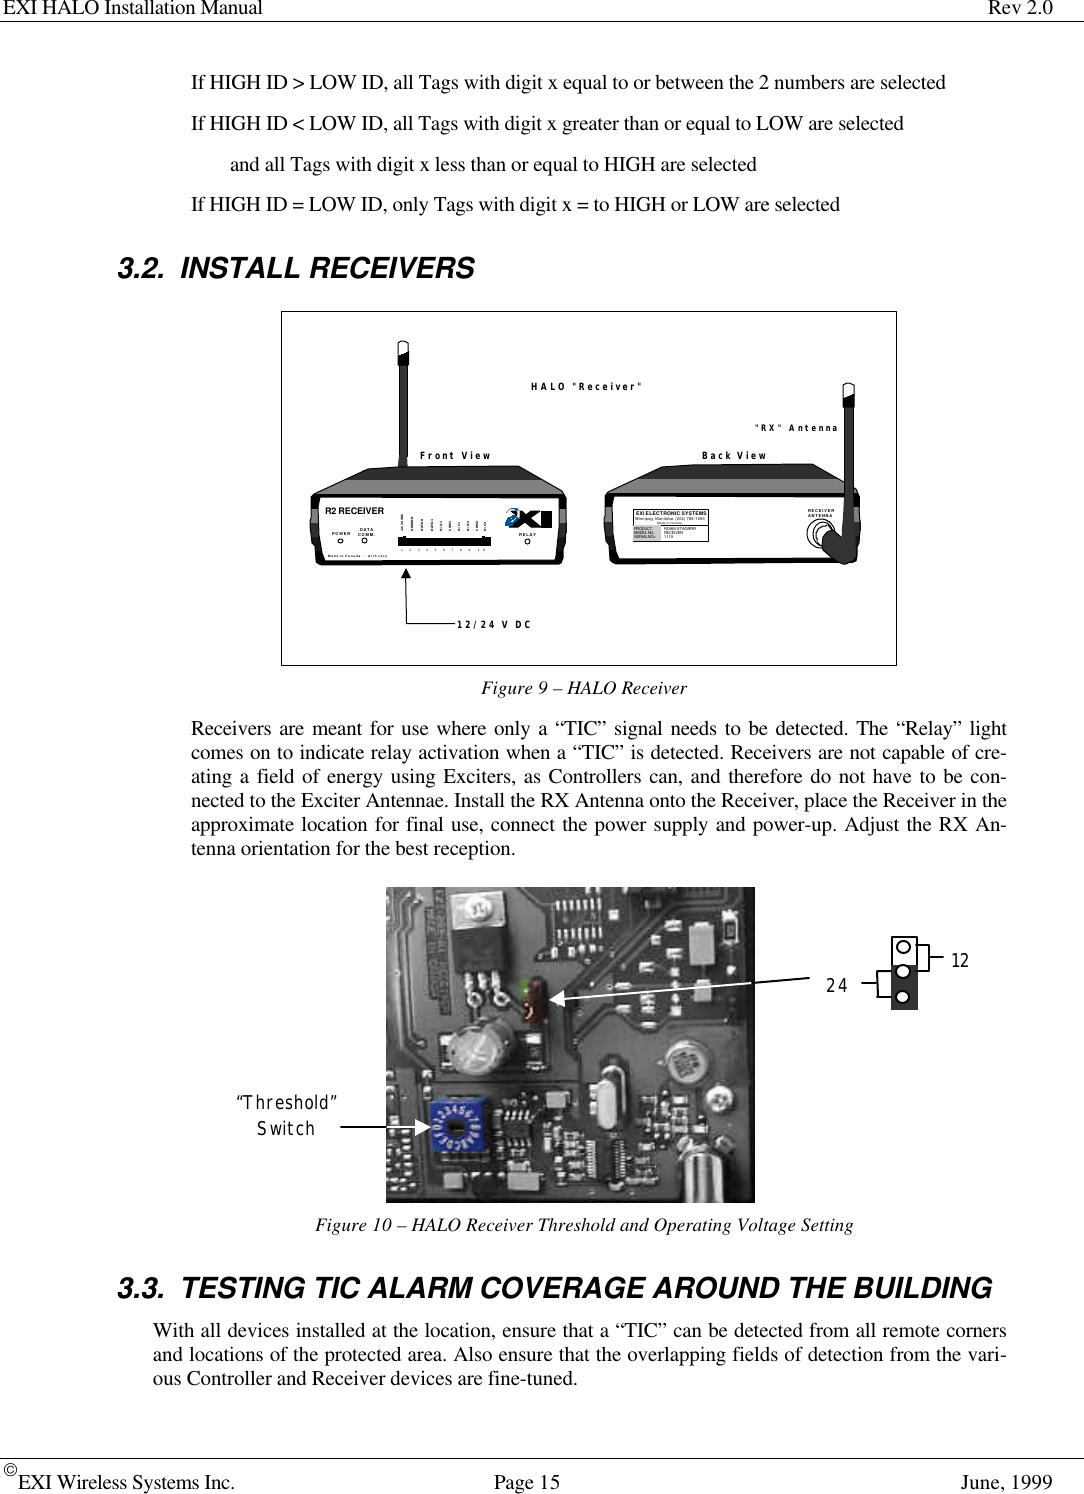 EXI HALO Installation Manual Rev 2.0EXI Wireless Systems Inc. Page 15 June, 1999If HIGH ID &gt; LOW ID, all Tags with digit x equal to or between the 2 numbers are selectedIf HIGH ID &lt; LOW ID, all Tags with digit x greater than or equal to LOW are selectedand all Tags with digit x less than or equal to HIGH are selectedIf HIGH ID = LOW ID, only Tags with digit x = to HIGH or LOW are selected3.2. INSTALL RECEIVERSFigure 9 – HALO ReceiverReceivers are meant for use where only a “TIC” signal needs to be detected. The “Relay” lightcomes on to indicate relay activation when a “TIC” is detected. Receivers are not capable of cre-ating a field of energy using Exciters, as Controllers can, and therefore do not have to be con-nected to the Exciter Antennae. Install the RX Antenna onto the Receiver, place the Receiver in theapproximate location for final use, connect the power supply and power-up. Adjust the RX An-tenna orientation for the best reception.Figure 10 – HALO Receiver Threshold and Operating Voltage Setting3.3. TESTING TIC ALARM COVERAGE AROUND THE BUILDINGWith all devices installed at the location, ensure that a “TIC” can be detected from all remote cornersand locations of the protected area. Also ensure that the overlapping fields of detection from the vari-ous Controller and Receiver devices are fine-tuned.&quot;RX&quot; Antenna12/24 V DCHALO &quot;Receiver&quot;R2 RECEIVERDATACOMM.Made in Canada . .  with care12/24 VDCGROUNDDATA 0DATA 1N/O 1COM 1N/C 1N/O 2COM 2N/C 21   2   3   4   5   6   7   8   9    10POWER RELAYEXI ELECTRONIC SYSTEMSWinnipeg, Manitoba  (204) 788-1696Made in CanadaPRODUCTMODEL NO.SERIAL NO&gt;ROAM  II/TAGRRRRECEIVER1119RECEIVERANTENNABack ViewFront View“Threshold”Switch1224